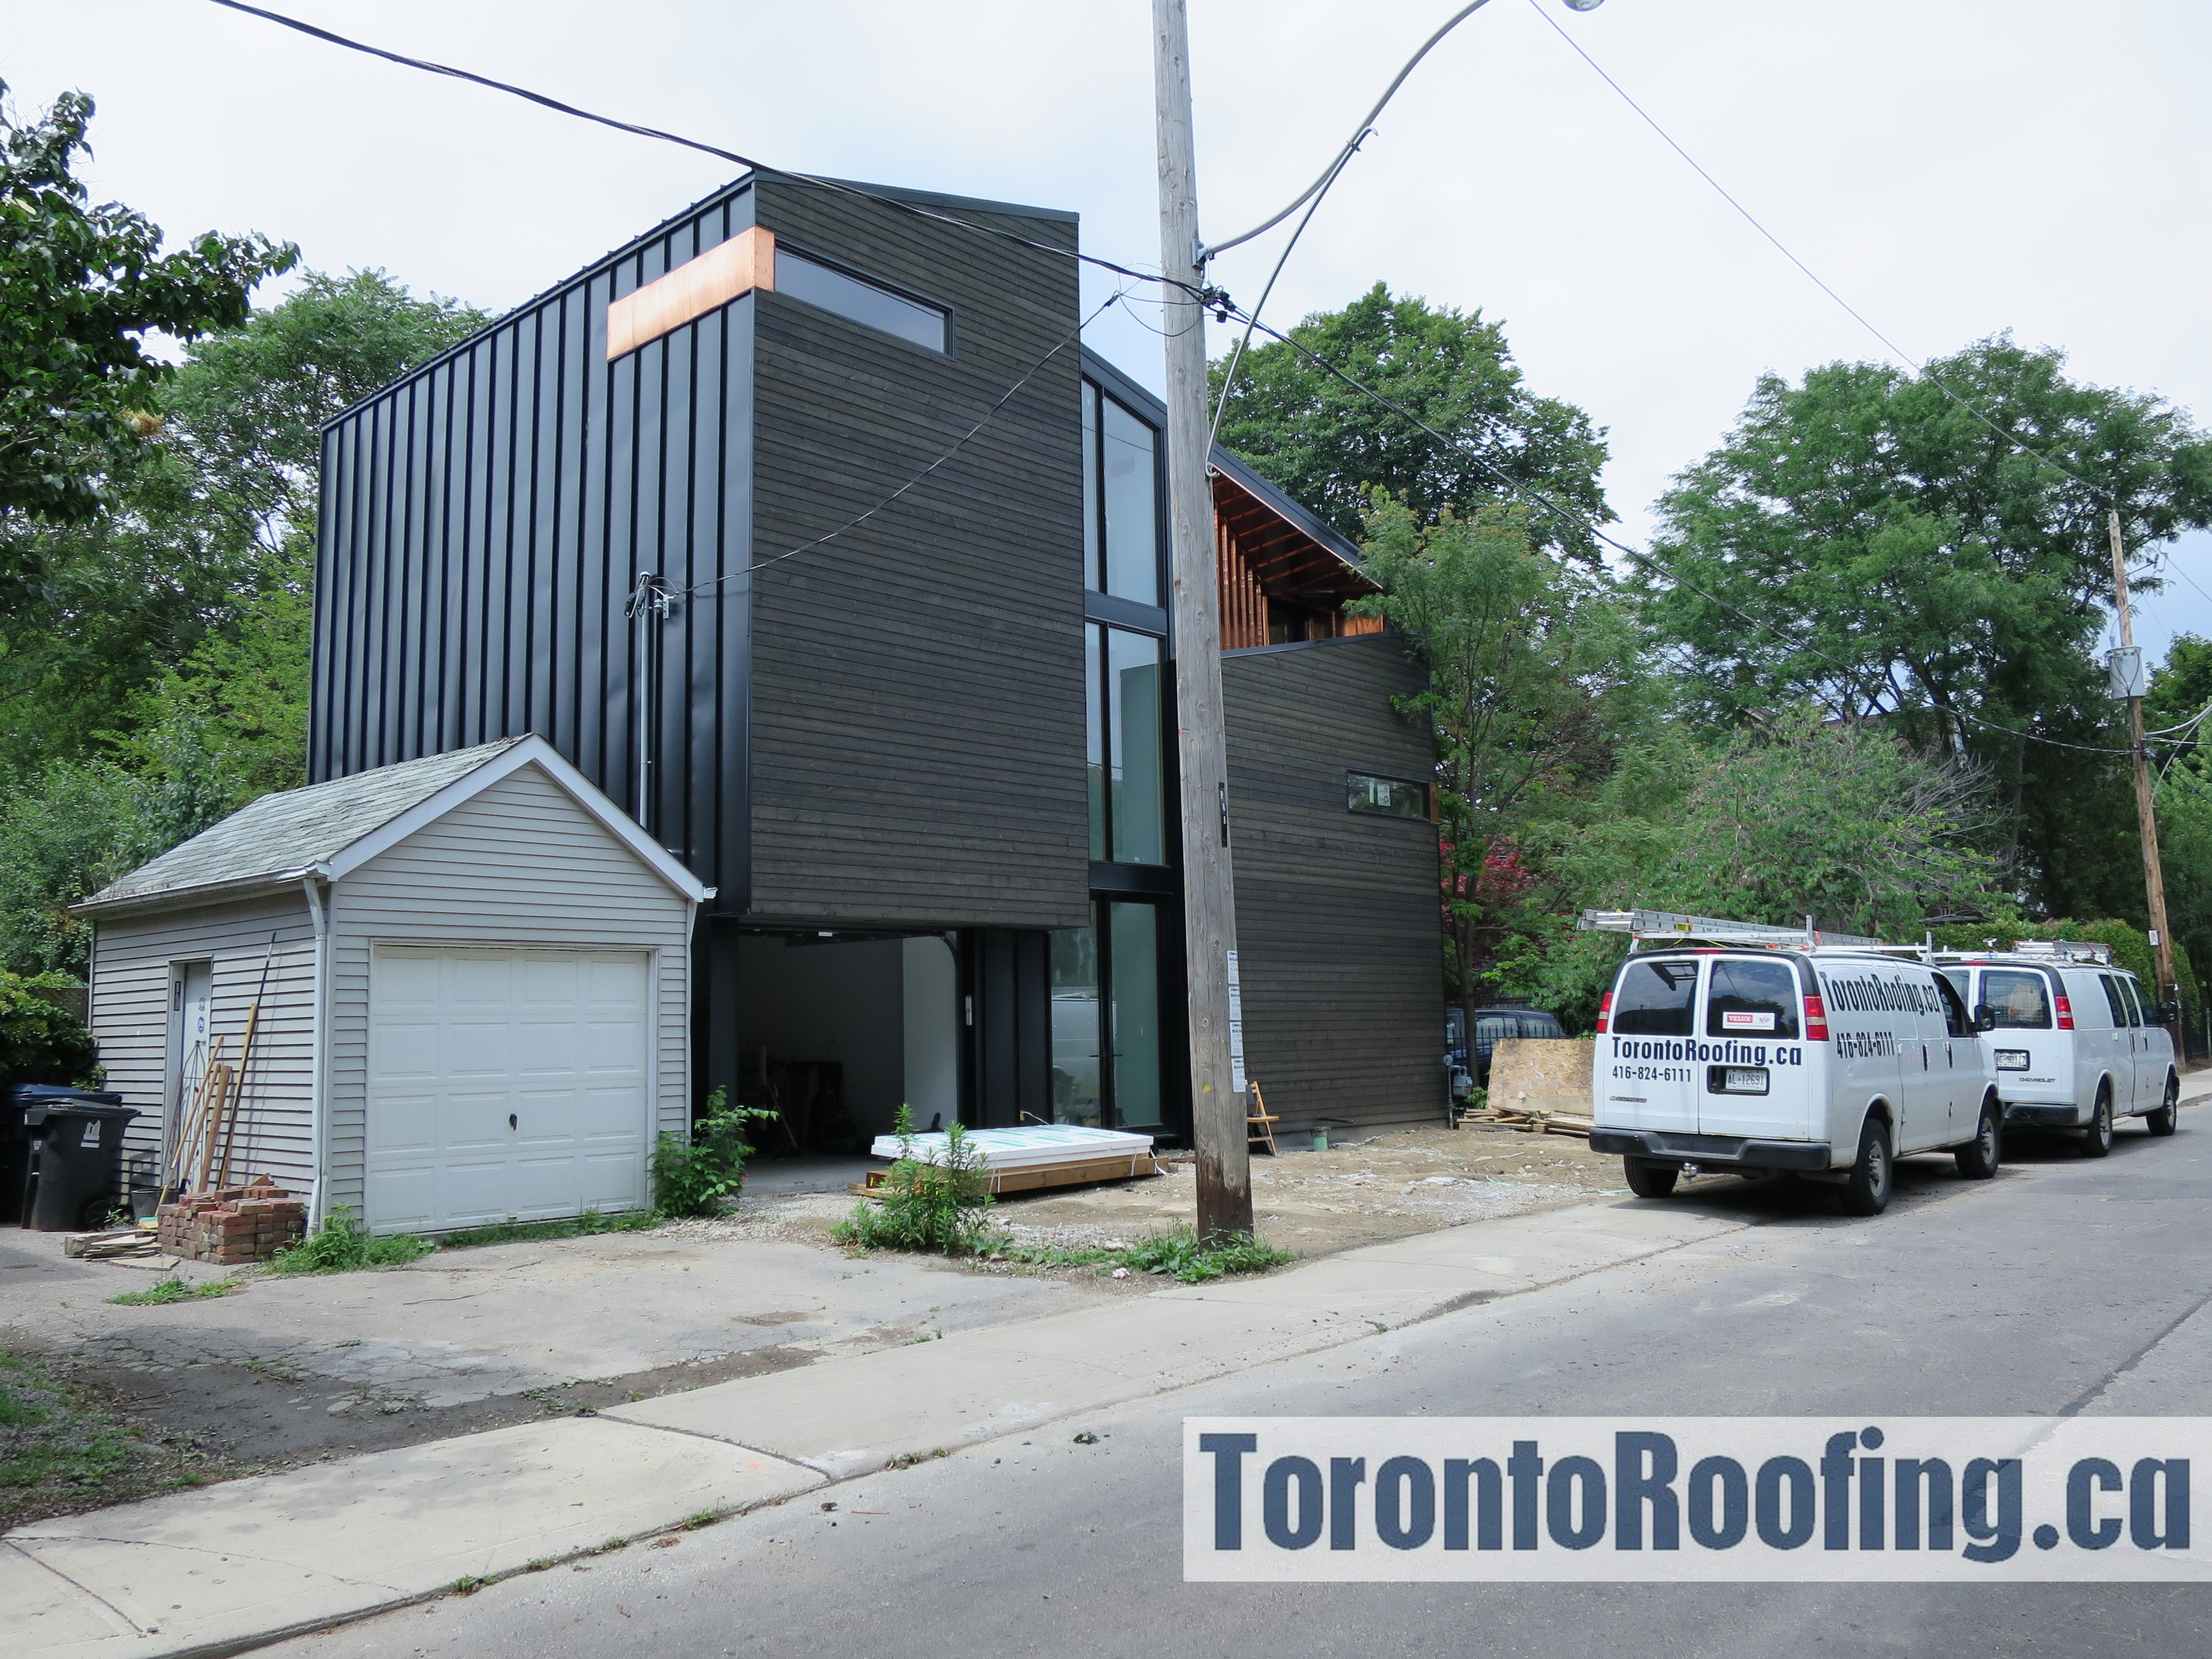 toronto-roofing-roof-siding-metal-copper-wood-modern-homes-aluminum-cladding-architeture-building-contractor-exterior-9